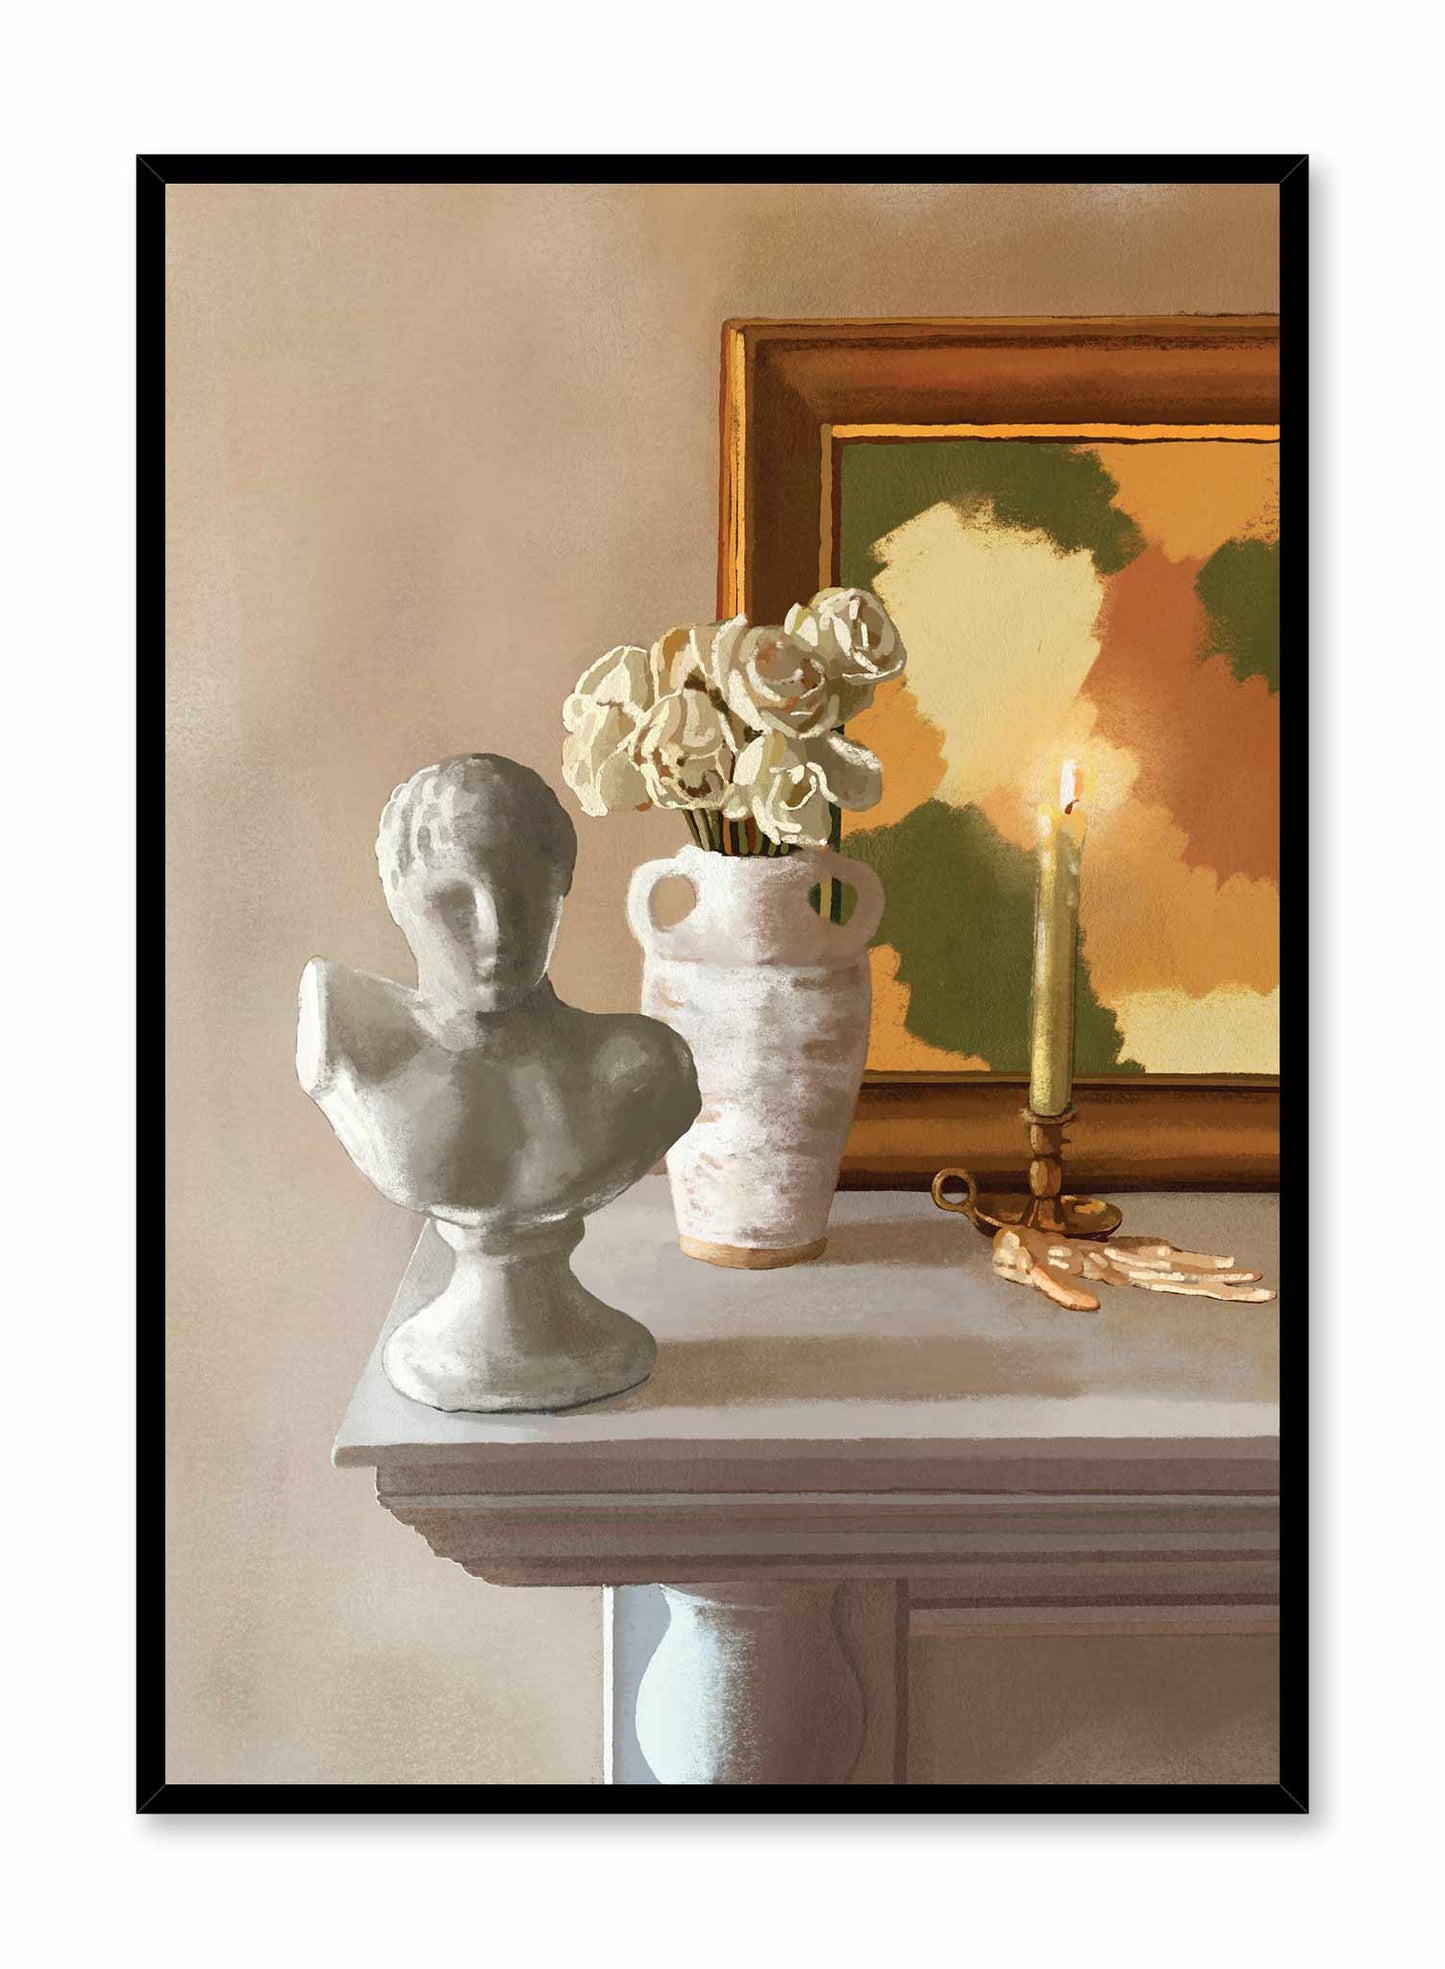 The Mantel is an illustration of a statue, a vase of white roses, and a melting candle in front of a colourful painting by Audrey Rivet in collaboration with Opposite Wall.